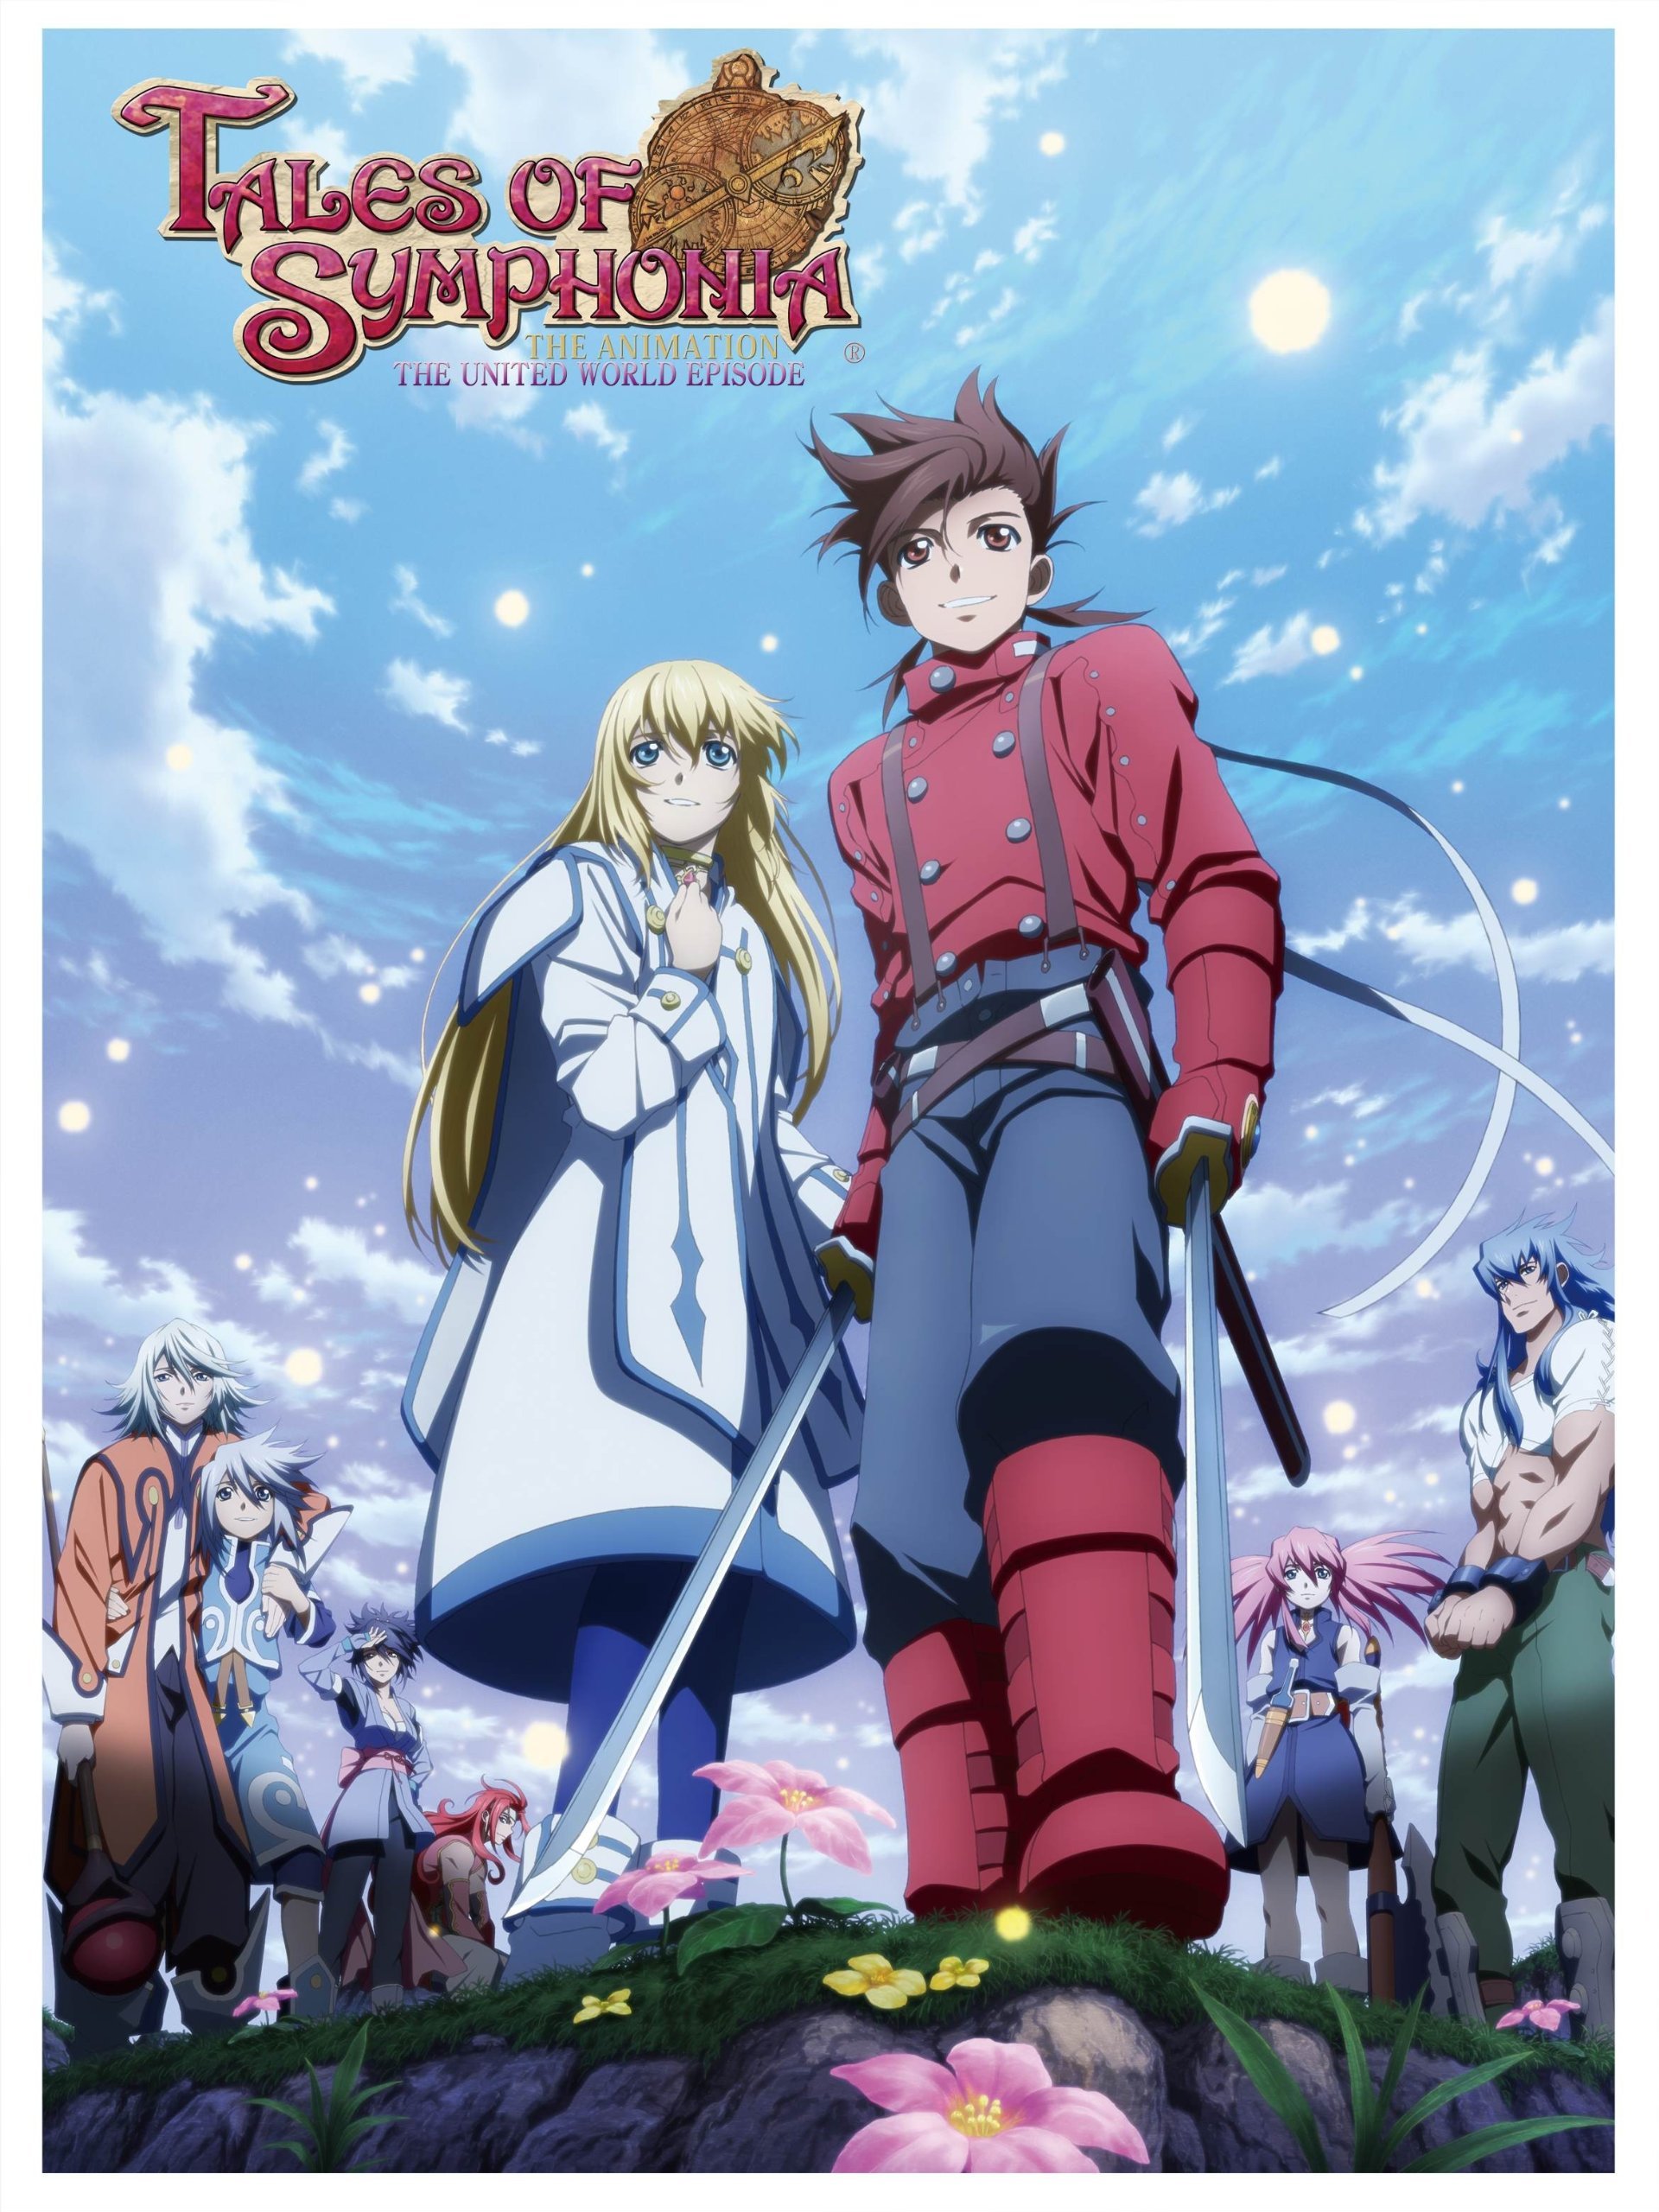 1920x2560 > Tales Of Symphonia Wallpapers